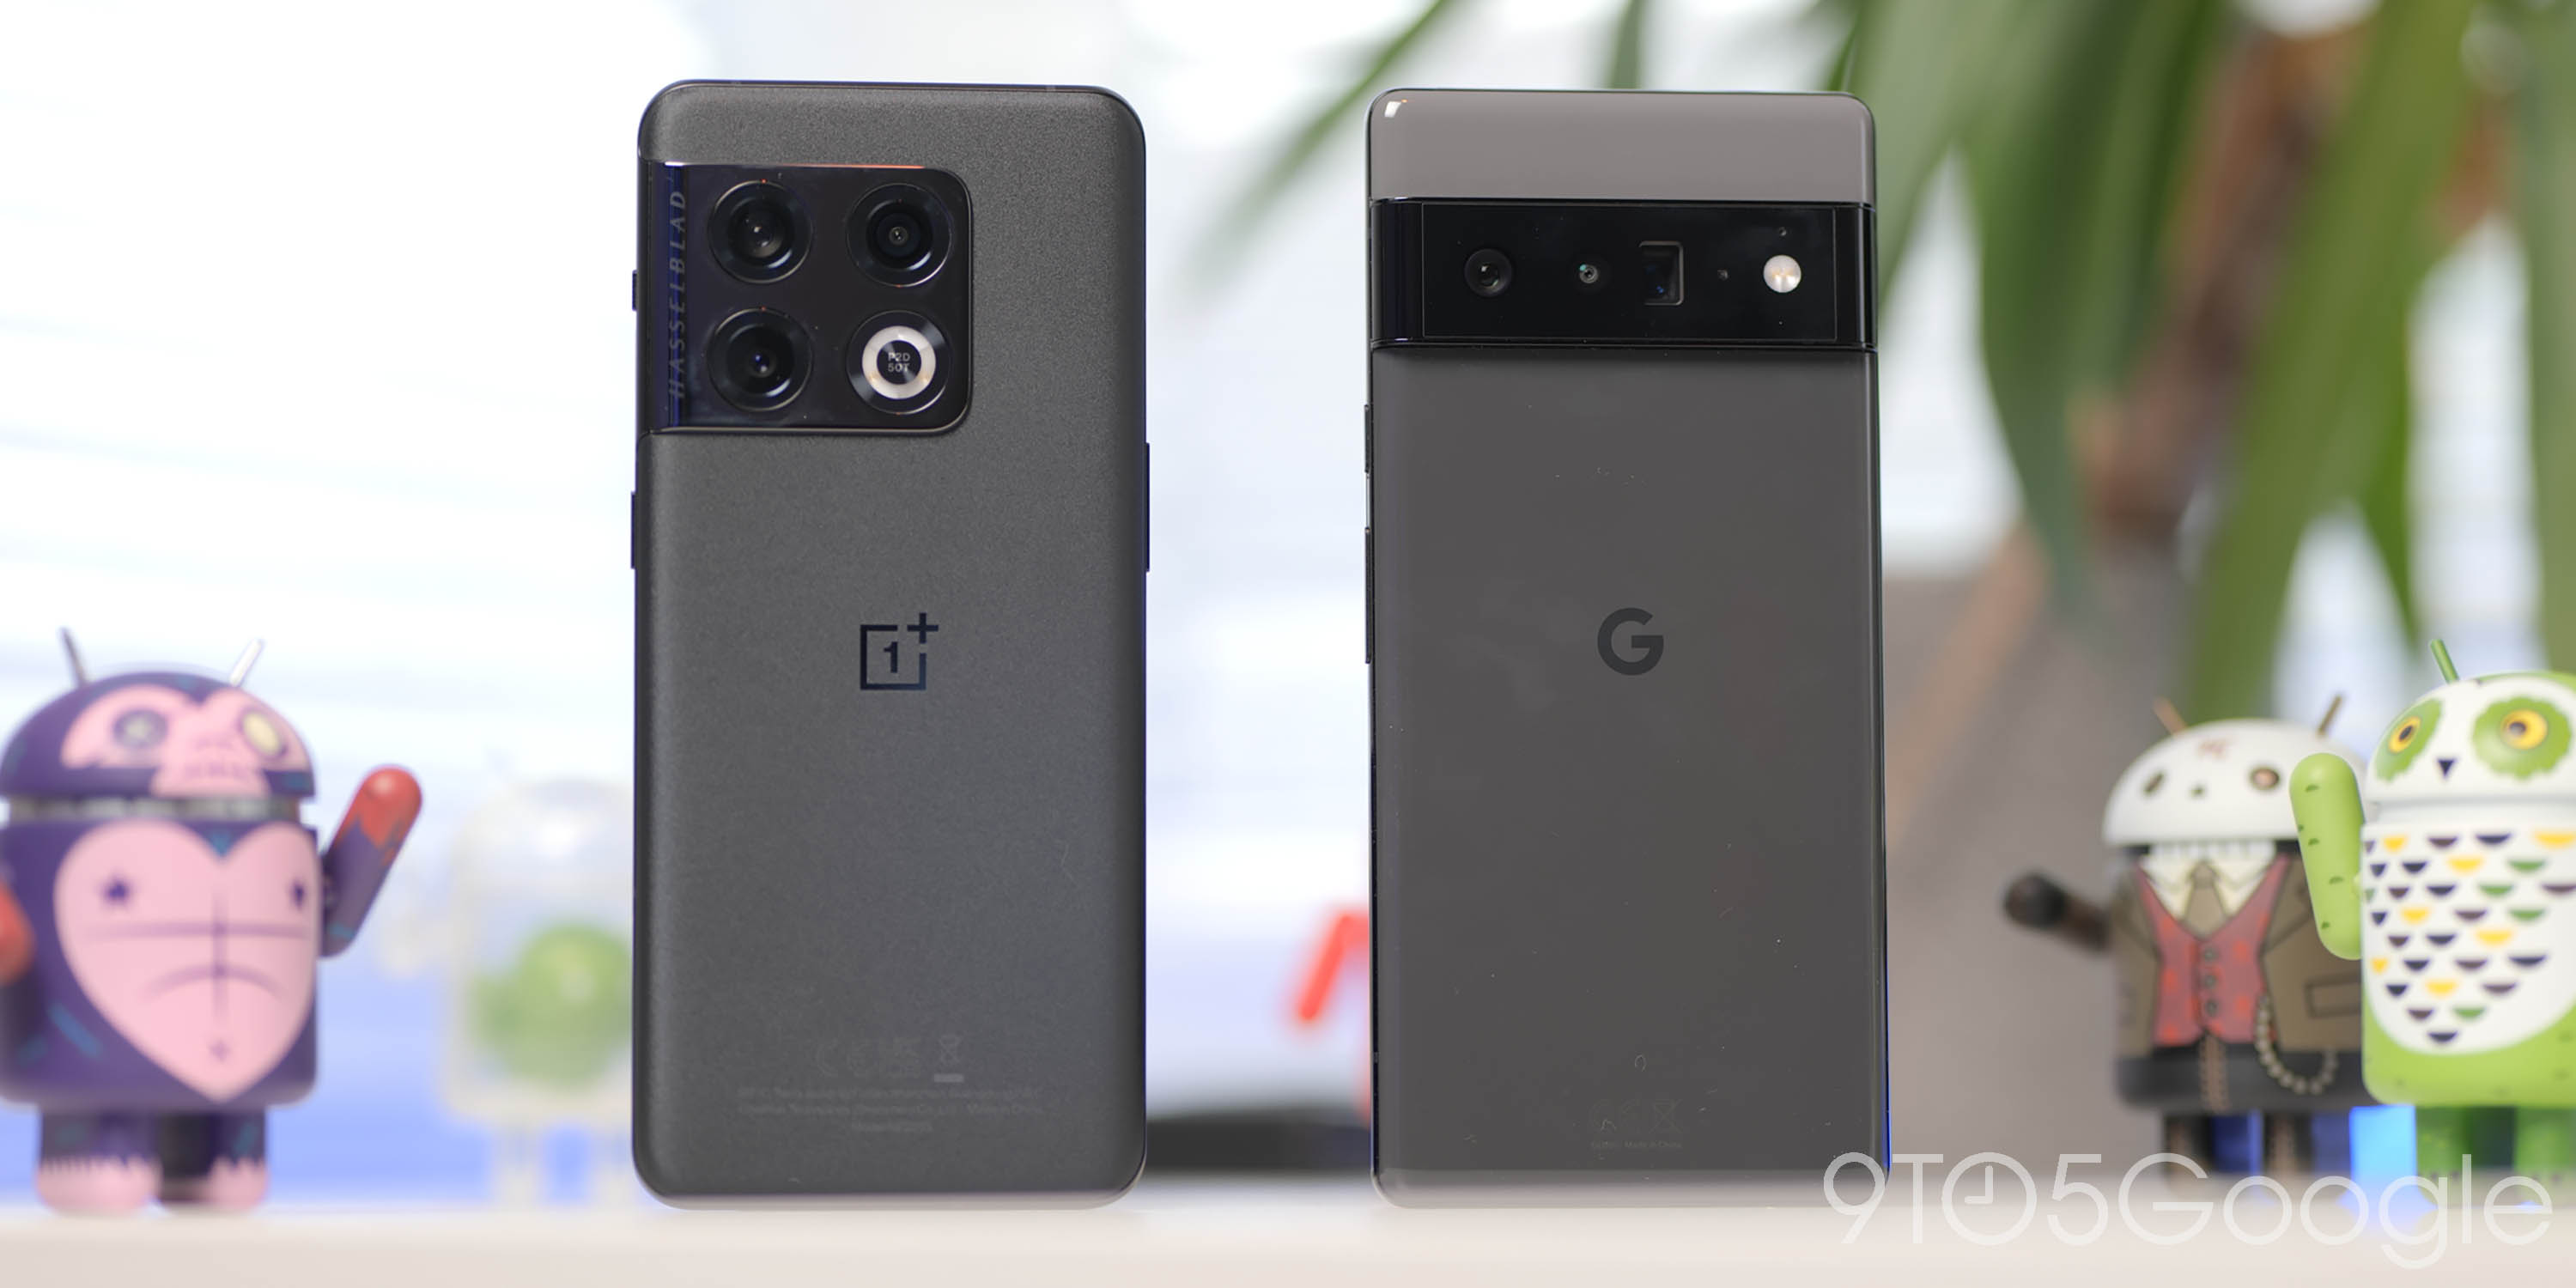 The OnePlus 10 Pro in Volcanic Black alongside the Pixel 6 Pro in Stormy Black